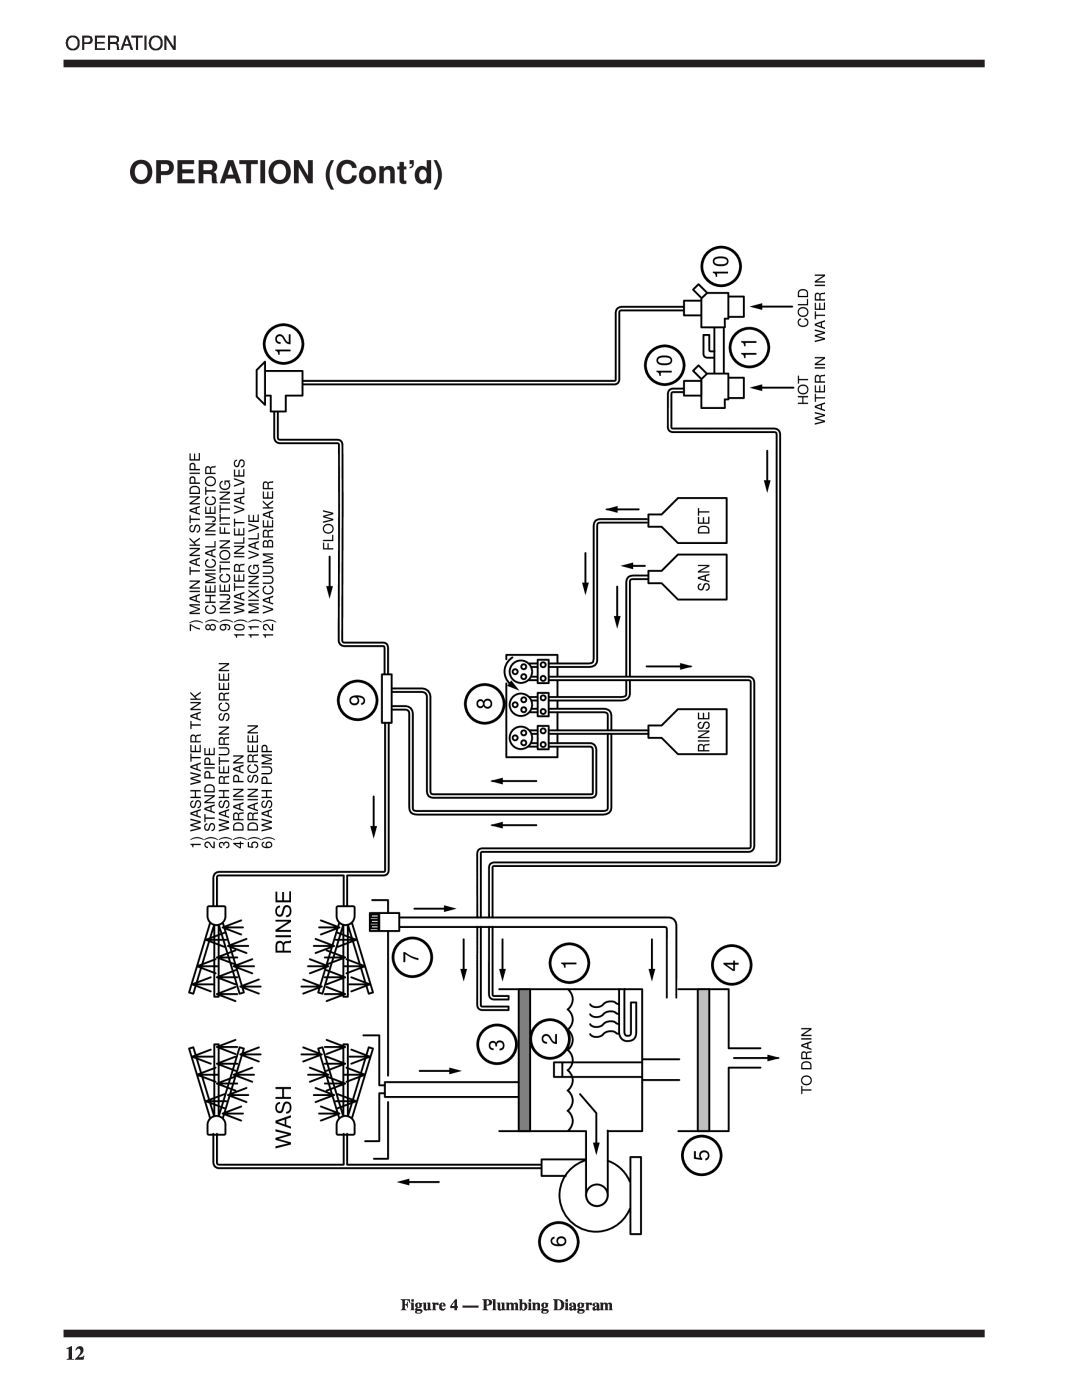 Moyer Diebel DF2-M6 Wash, Rinse, OPERATION Cont’d, Operation, Plumbing Diagram, To Drain, DRAIN SCREEN 6 WASH PUMP, Flow 